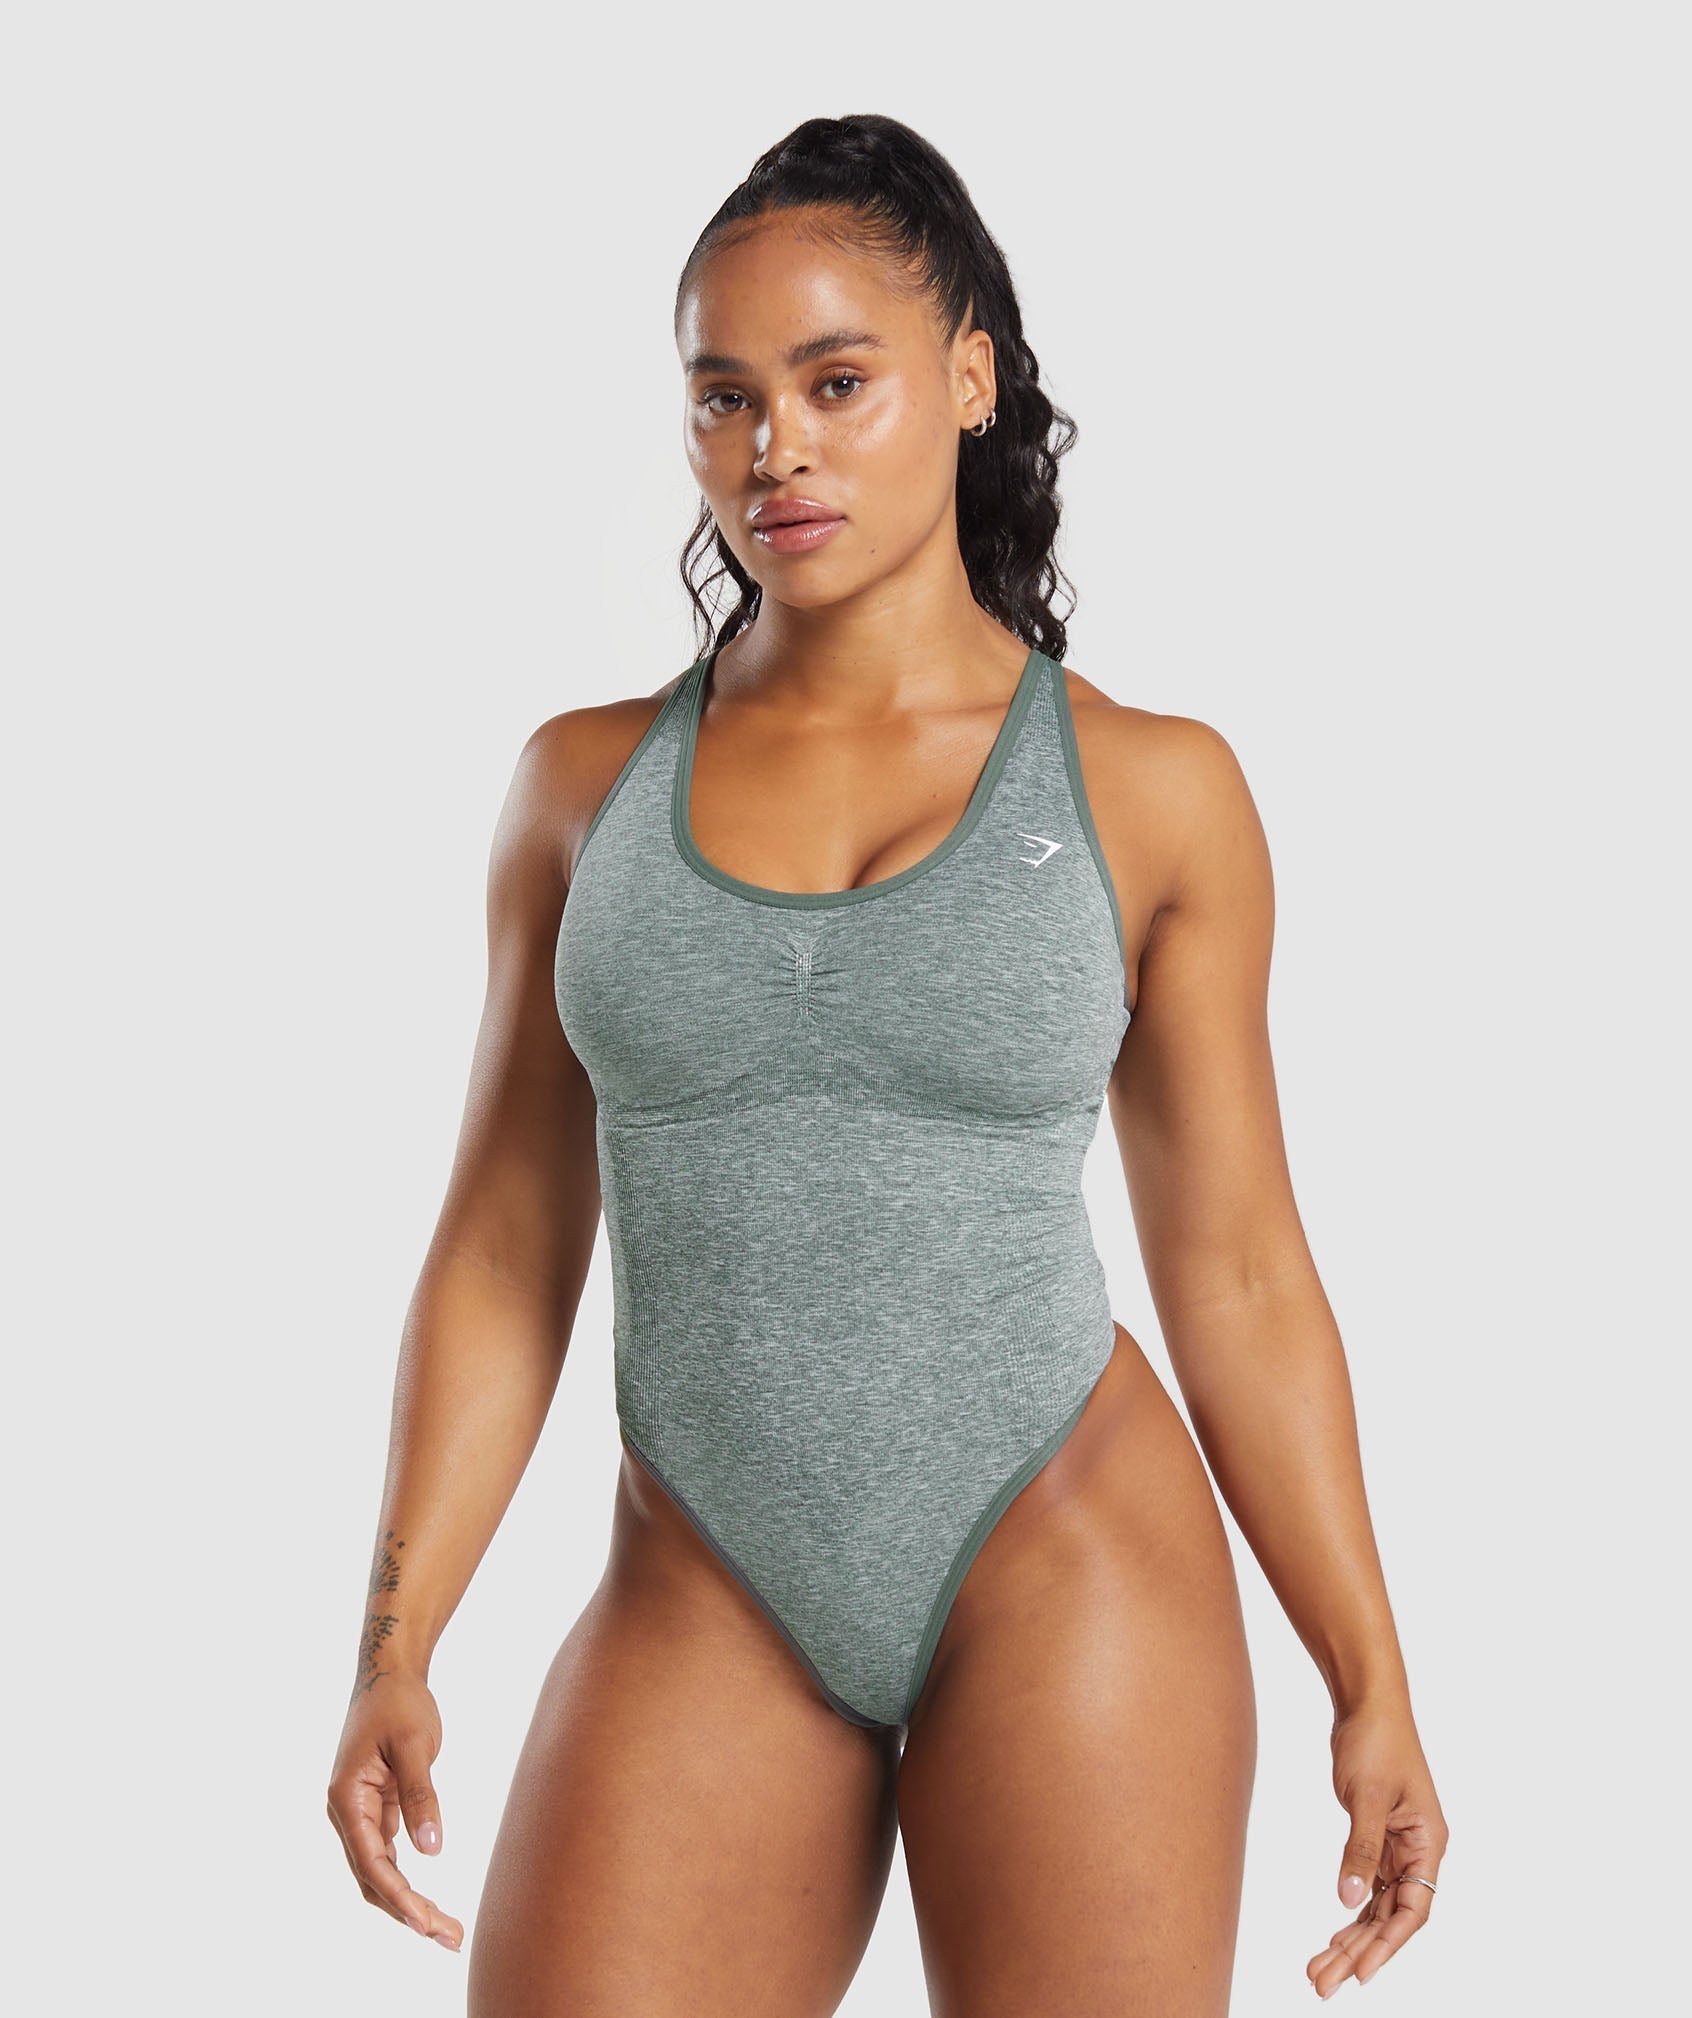 Lift Contour Seamless Bodysuit in Slate Teal/White Marl - view 1